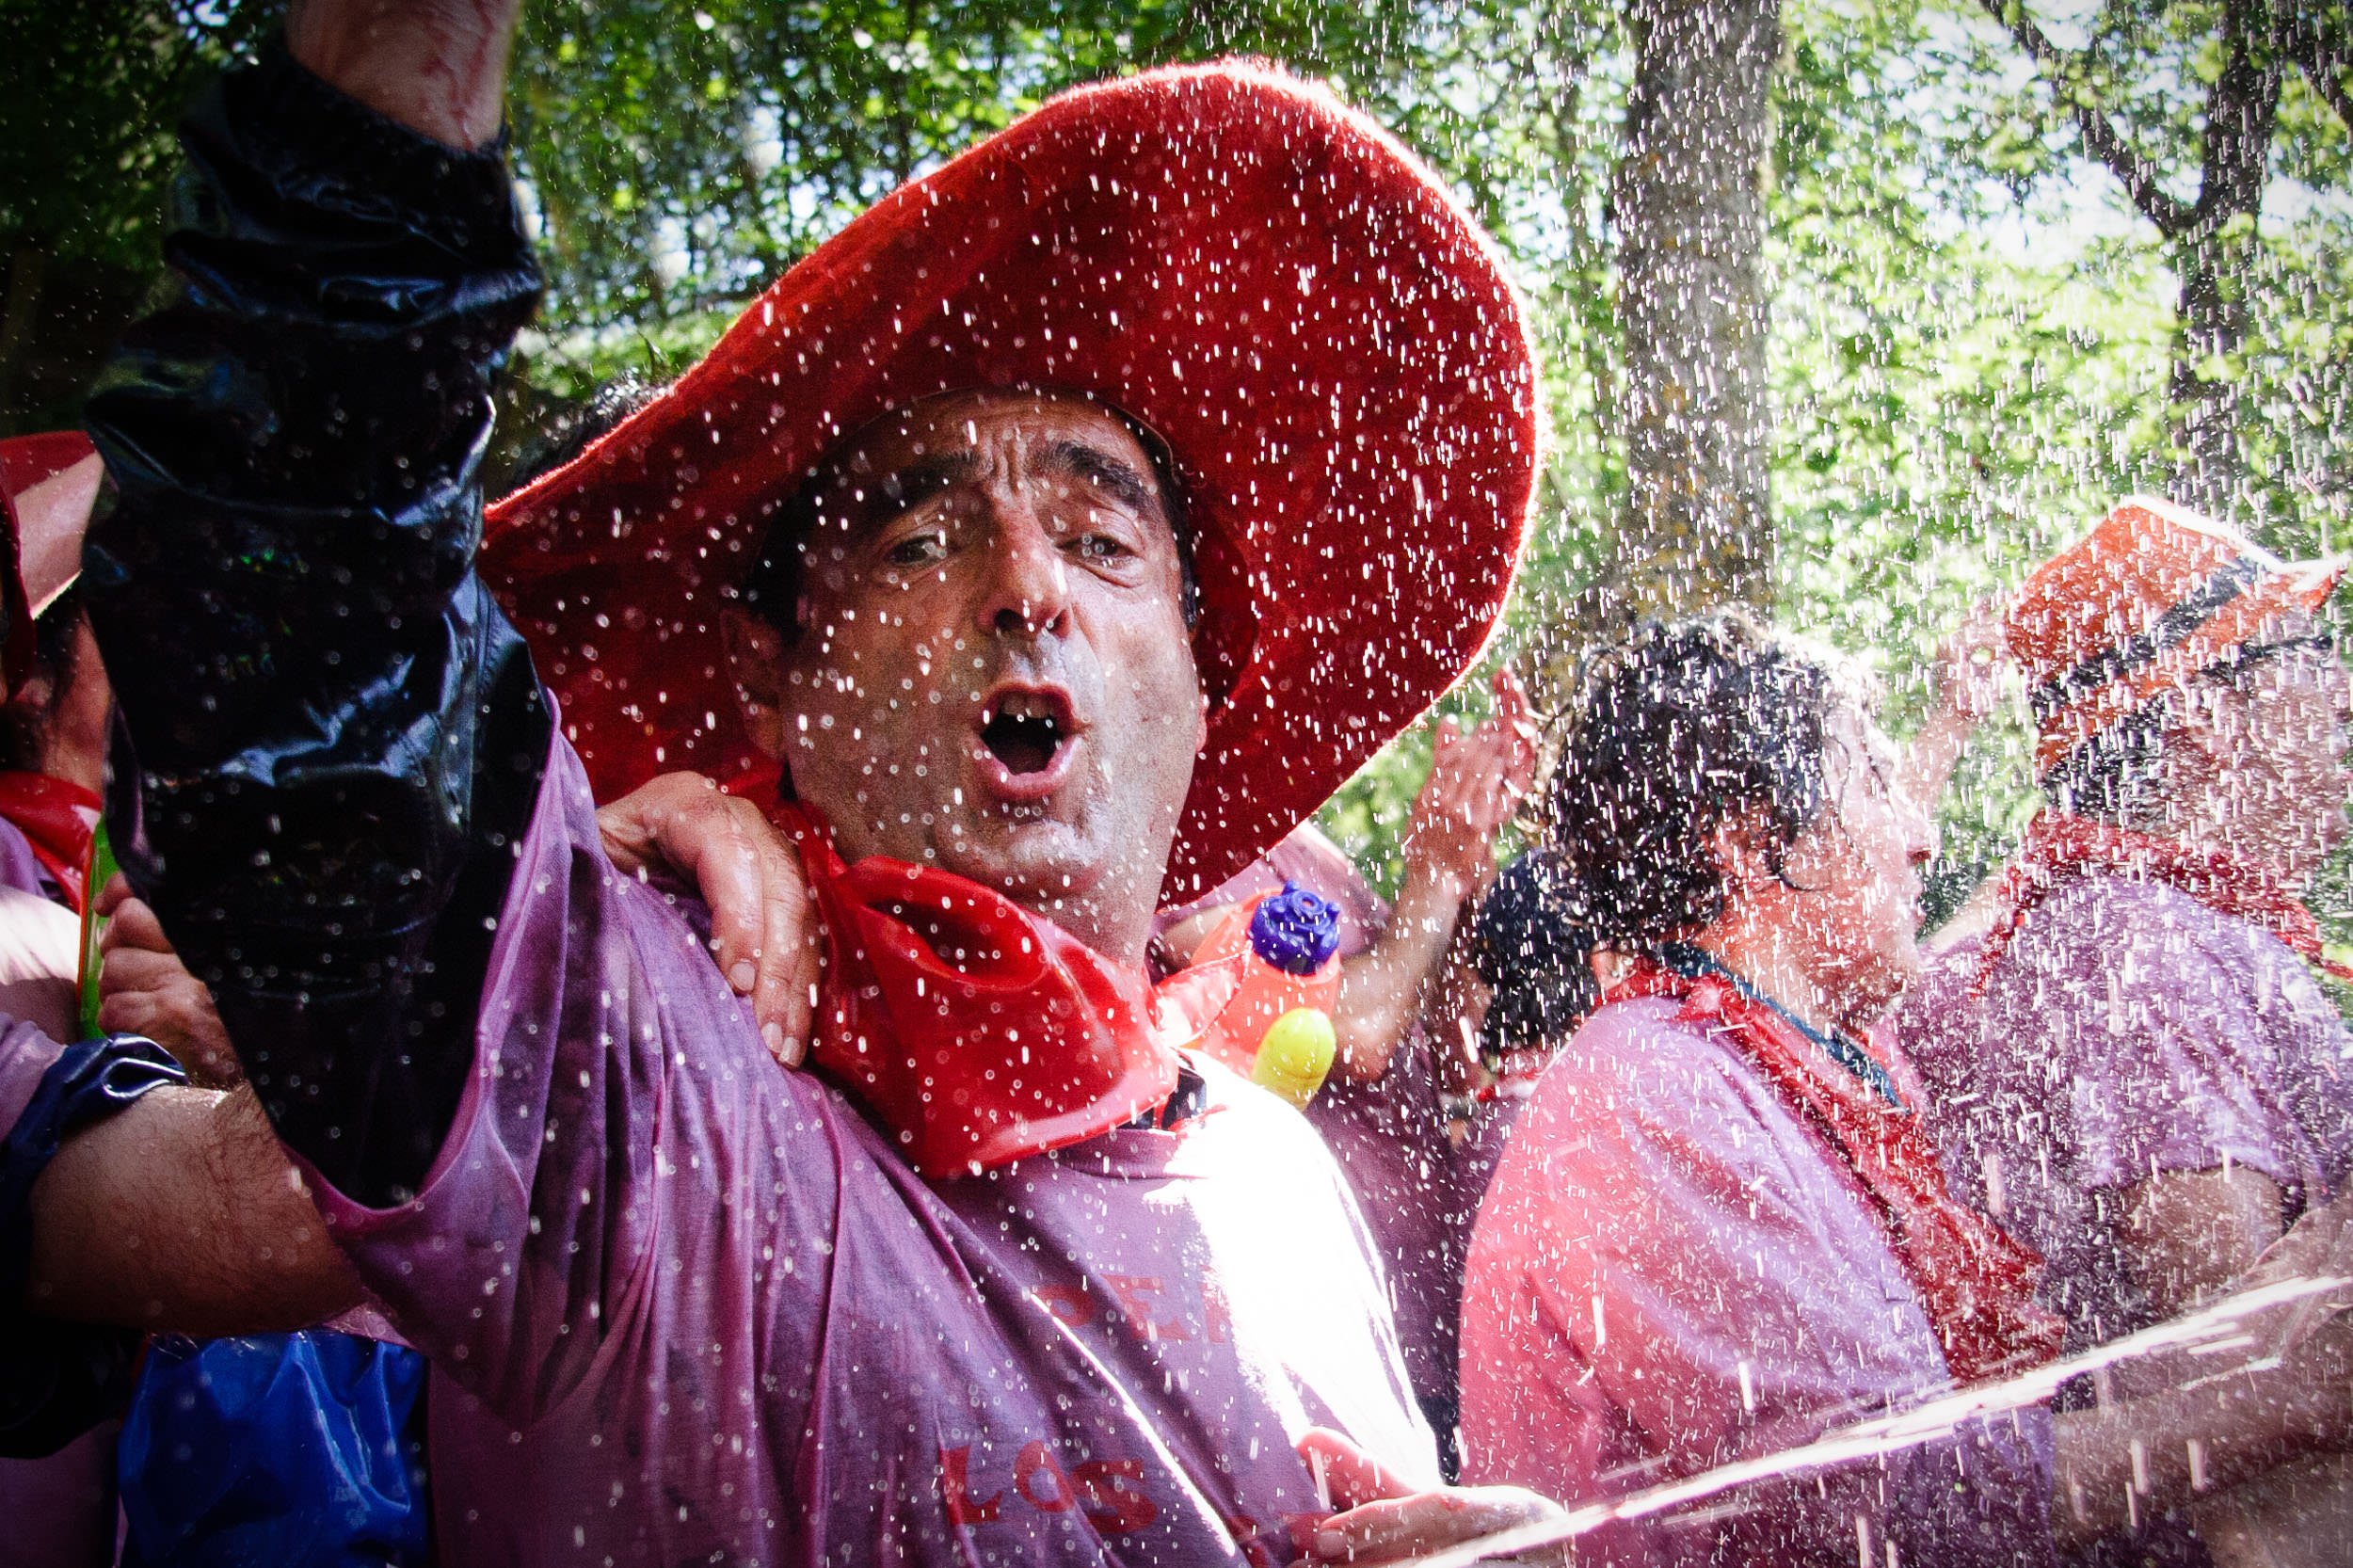 Riscos de Bilibio, Haro, La Rioja, Spain. 29 June 2014. Revellers at Haro Wine Battle held annually on St Peter's Day. Haro is at the heart of the Rioja wine region. In 2013 35% of Rioja exports were destined for the UK. Photo: James Sturcke | sturck